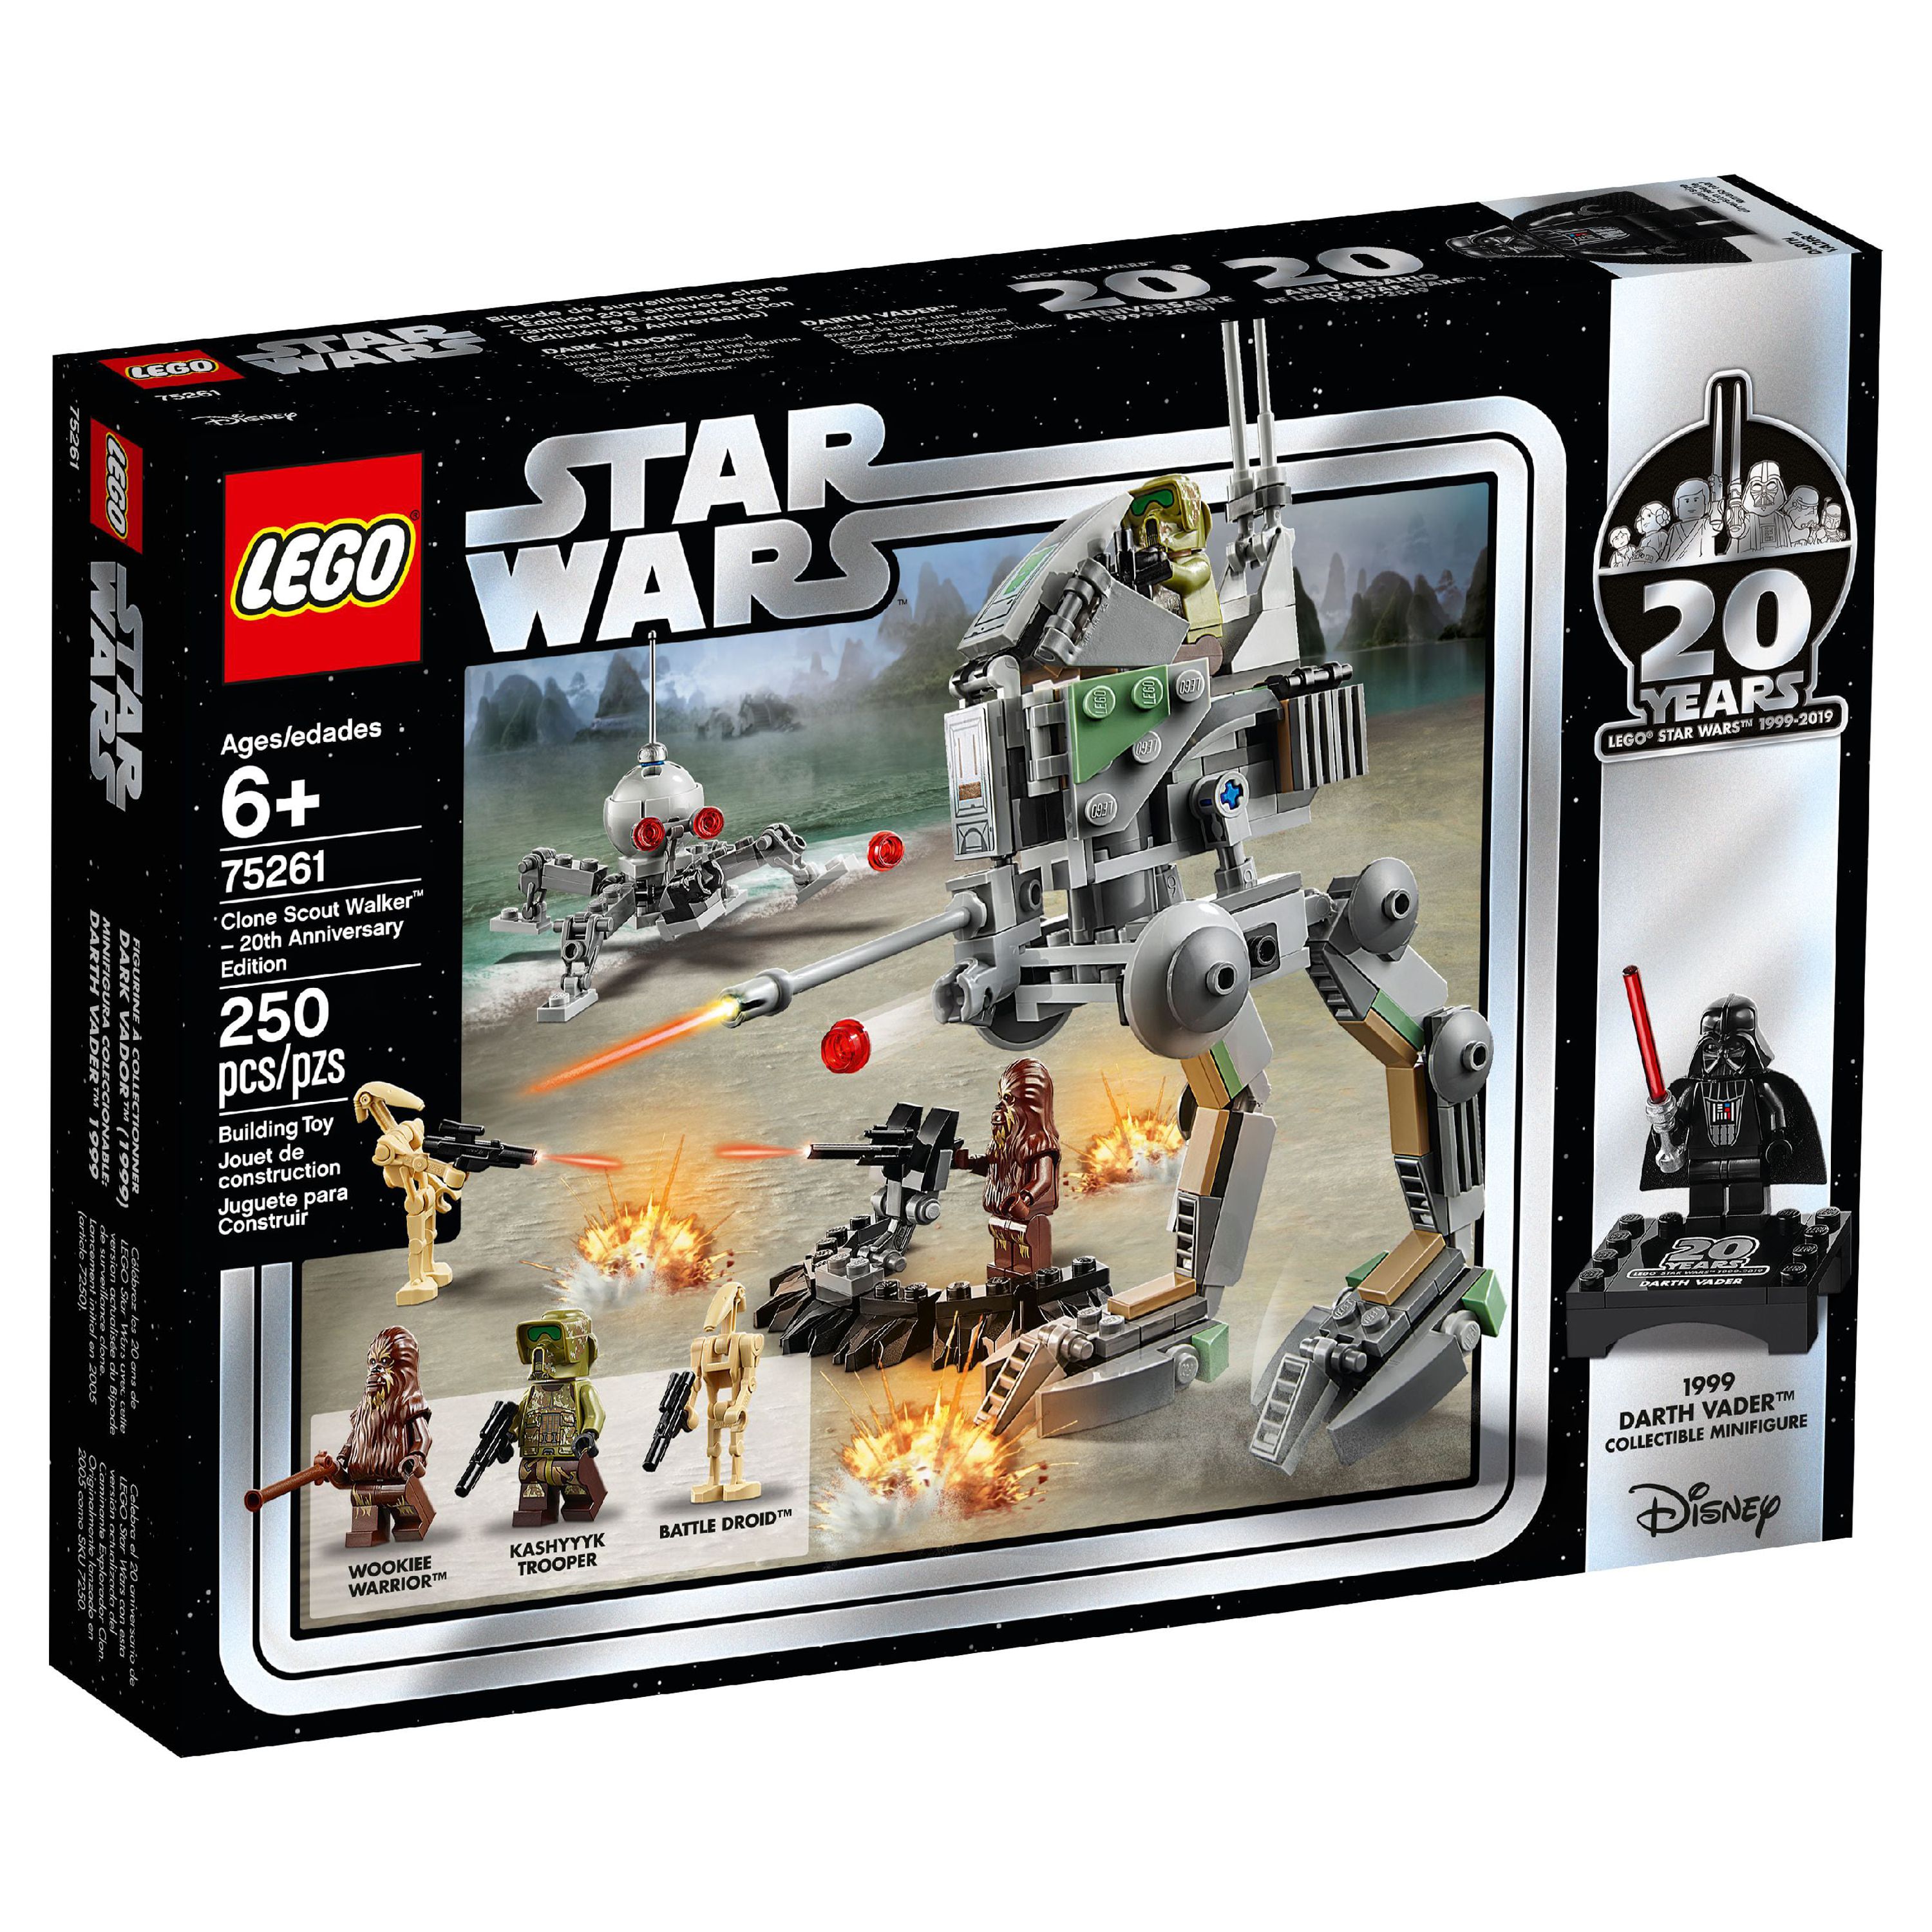 LEGO Star Wars 20th Anniversary Edition Clone Scout Walker 75261 Building Set - image 4 of 7